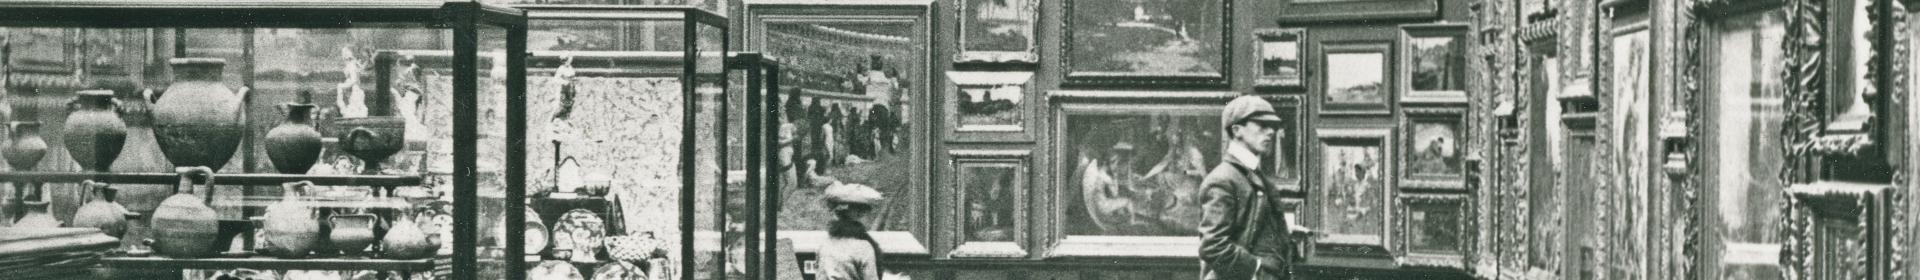 Image: historic image of the Victoria Art Gallery